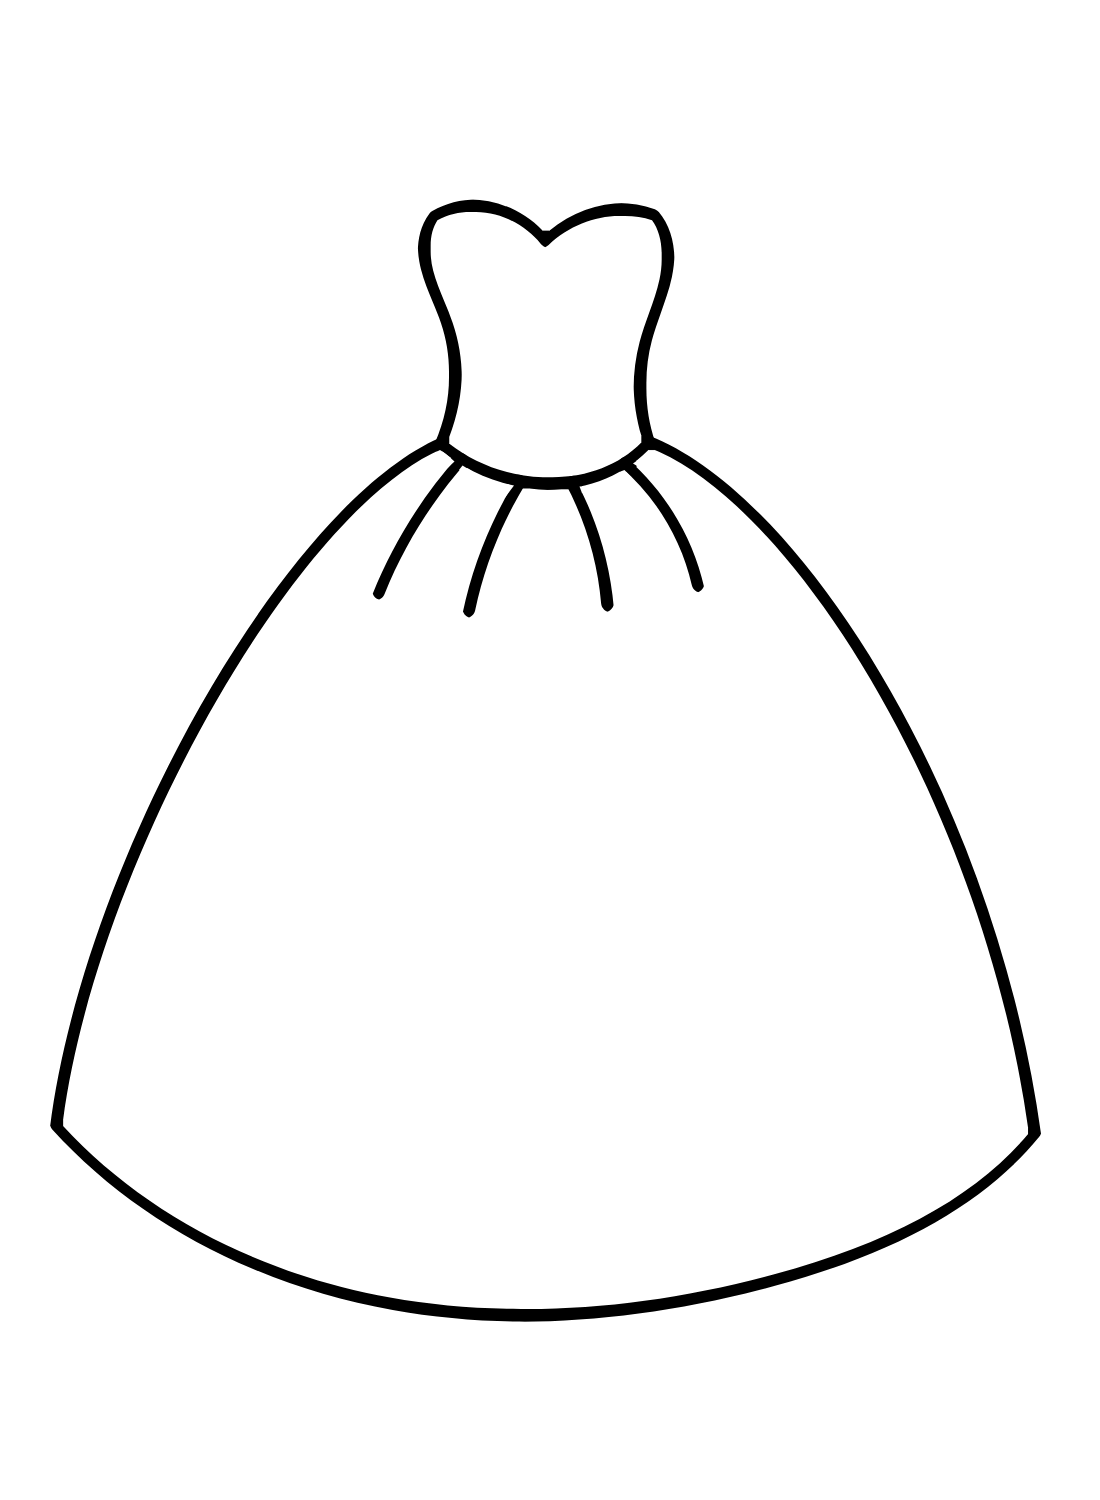 Draw Easy Wedding Dress Coloring Page